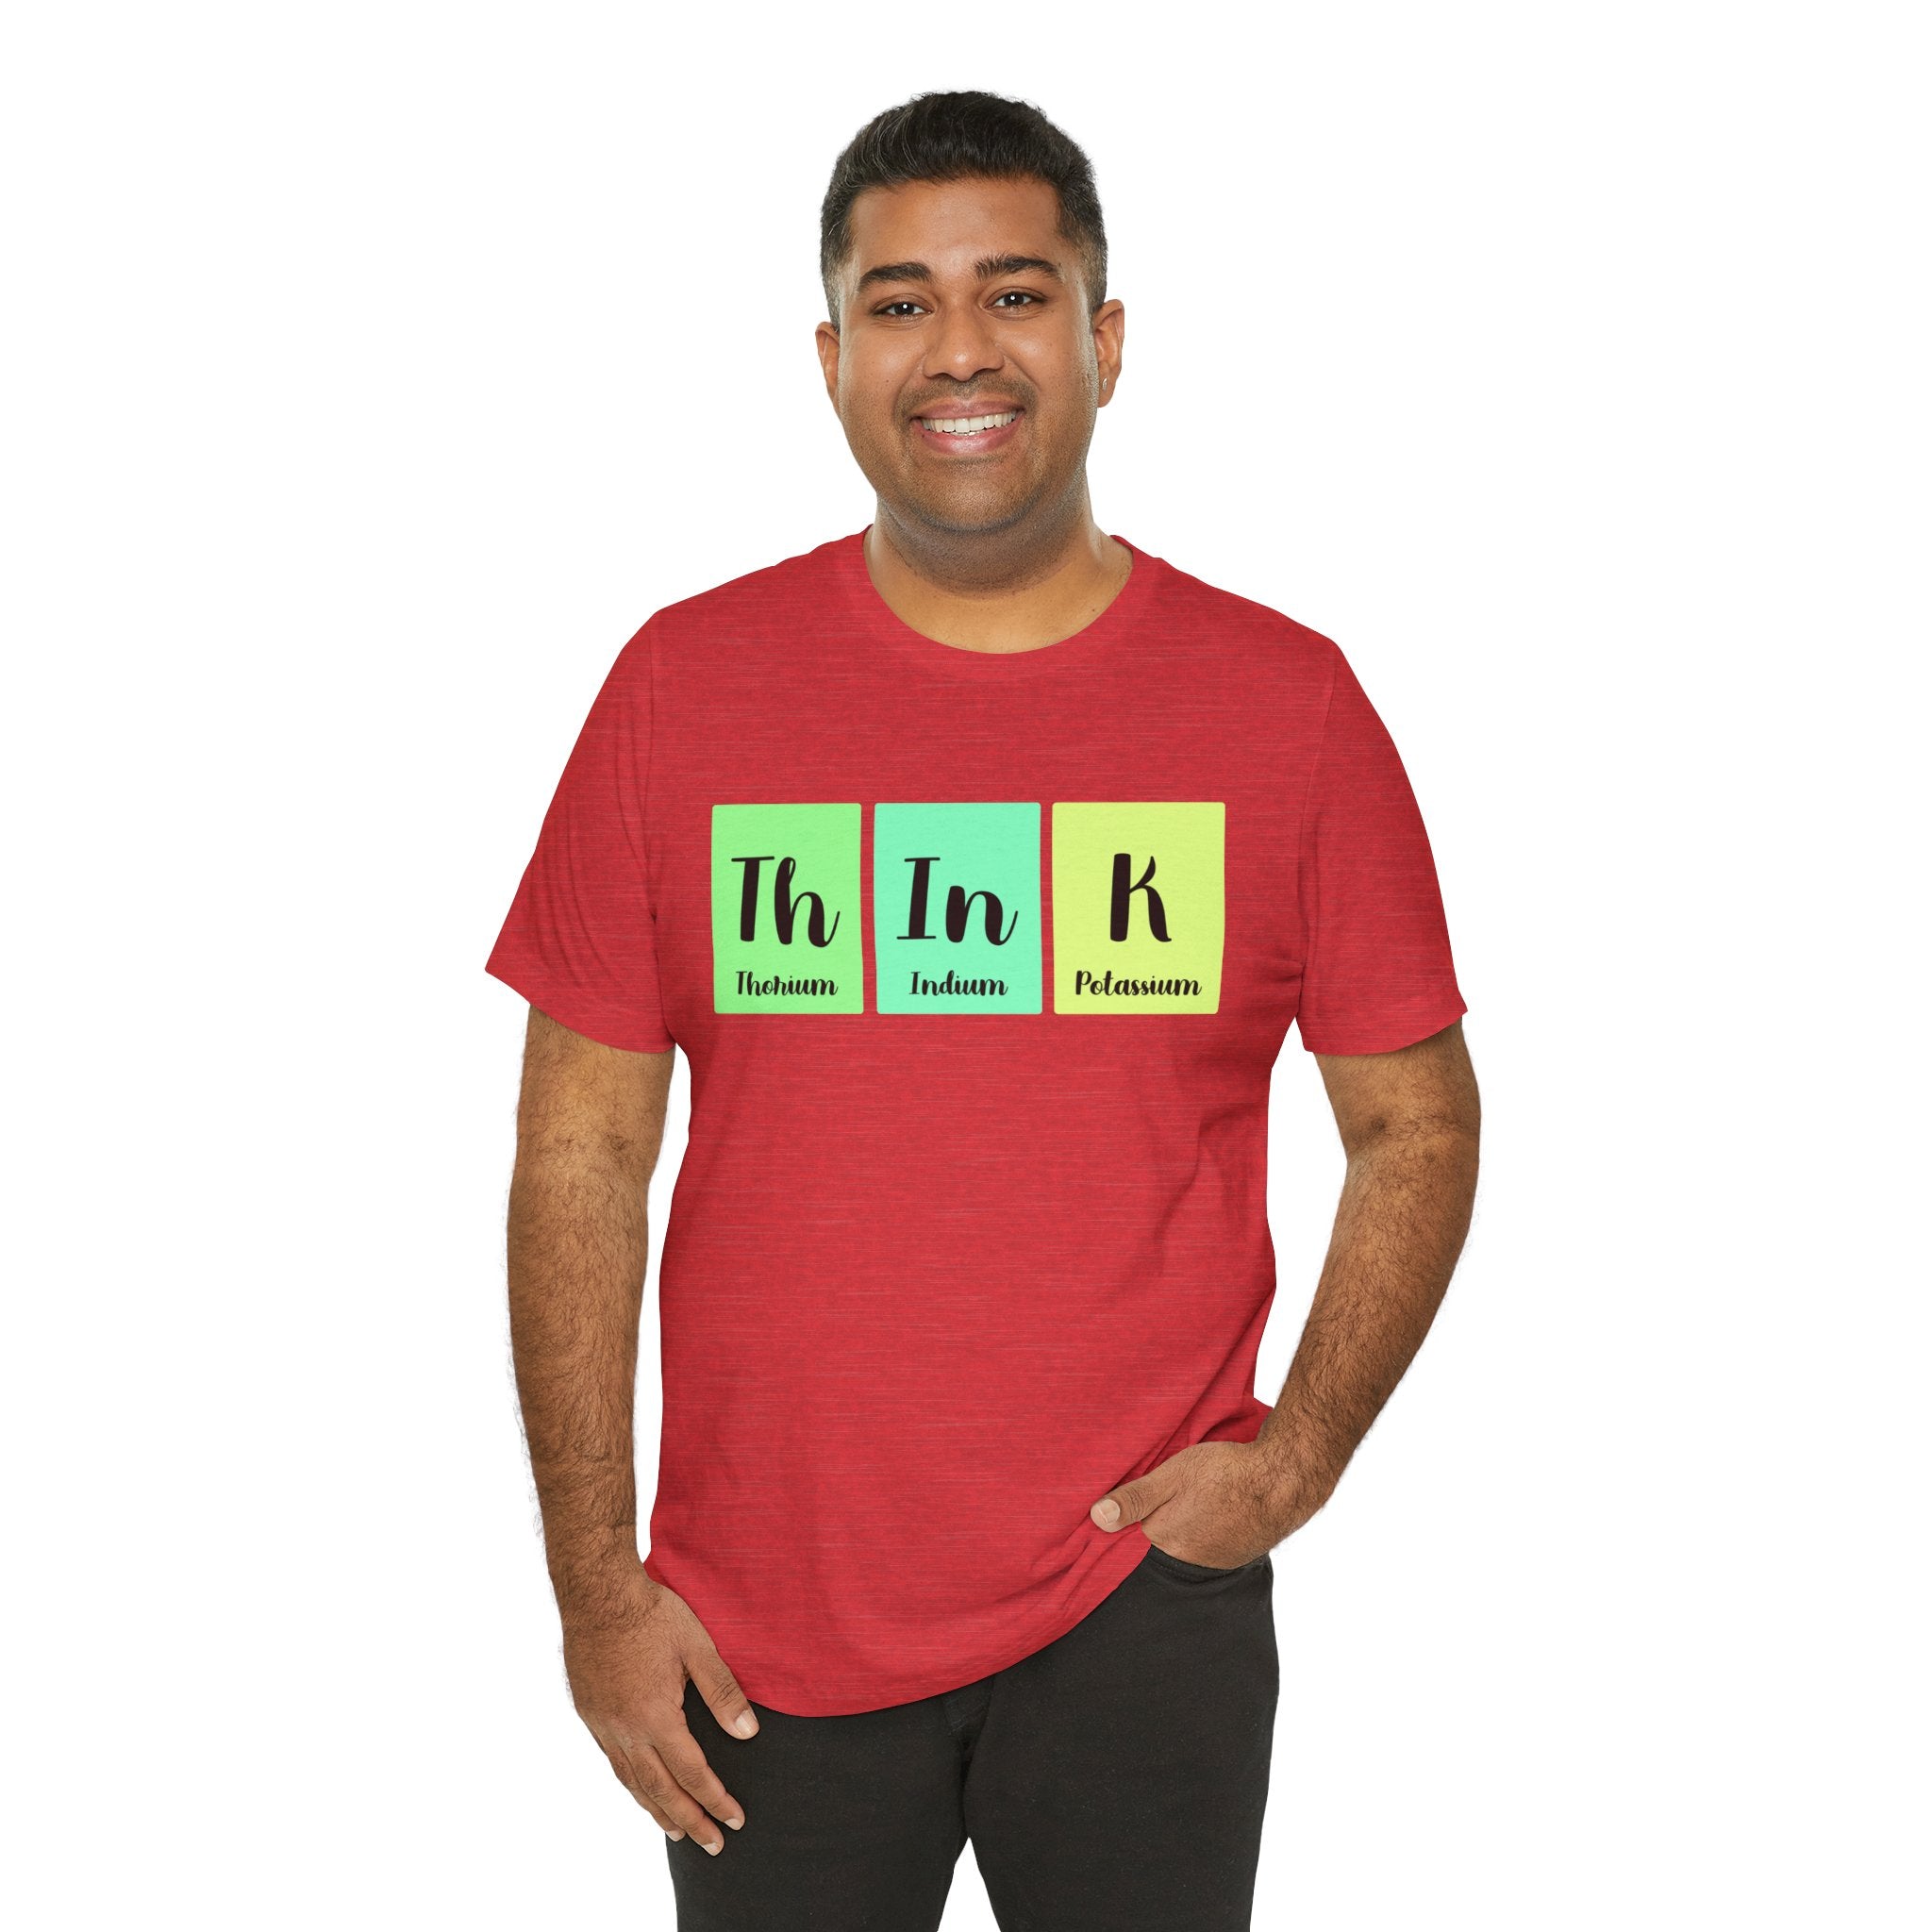 A man smiling, wearing a red unisex jersey tee with "Th-In-k" using elements from the periodic table printed on it.